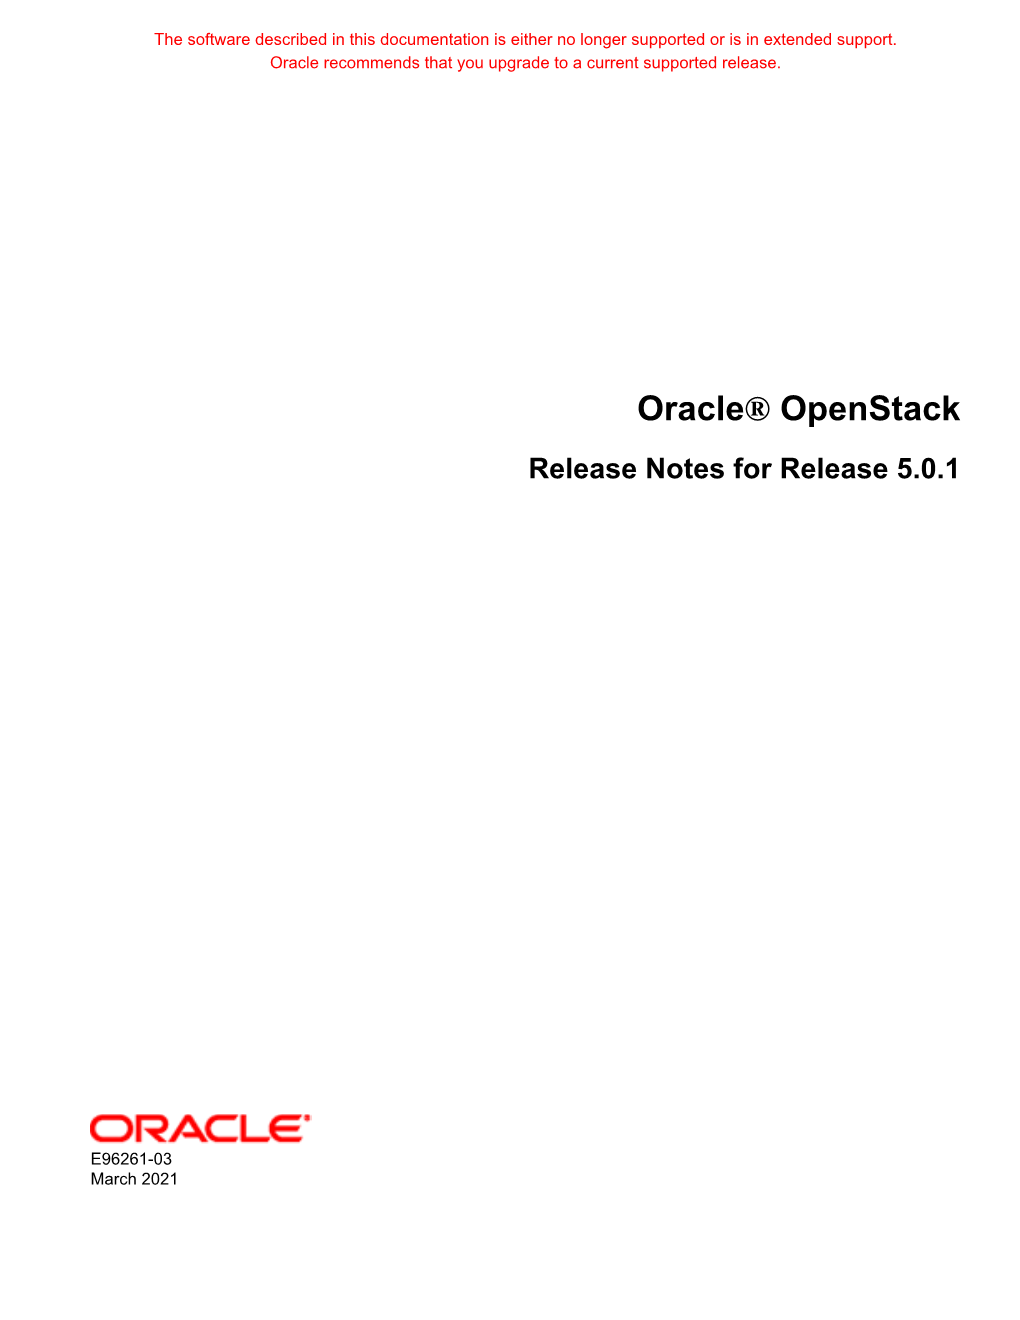 Oracle® Openstack Release Notes for Release 5.0.1